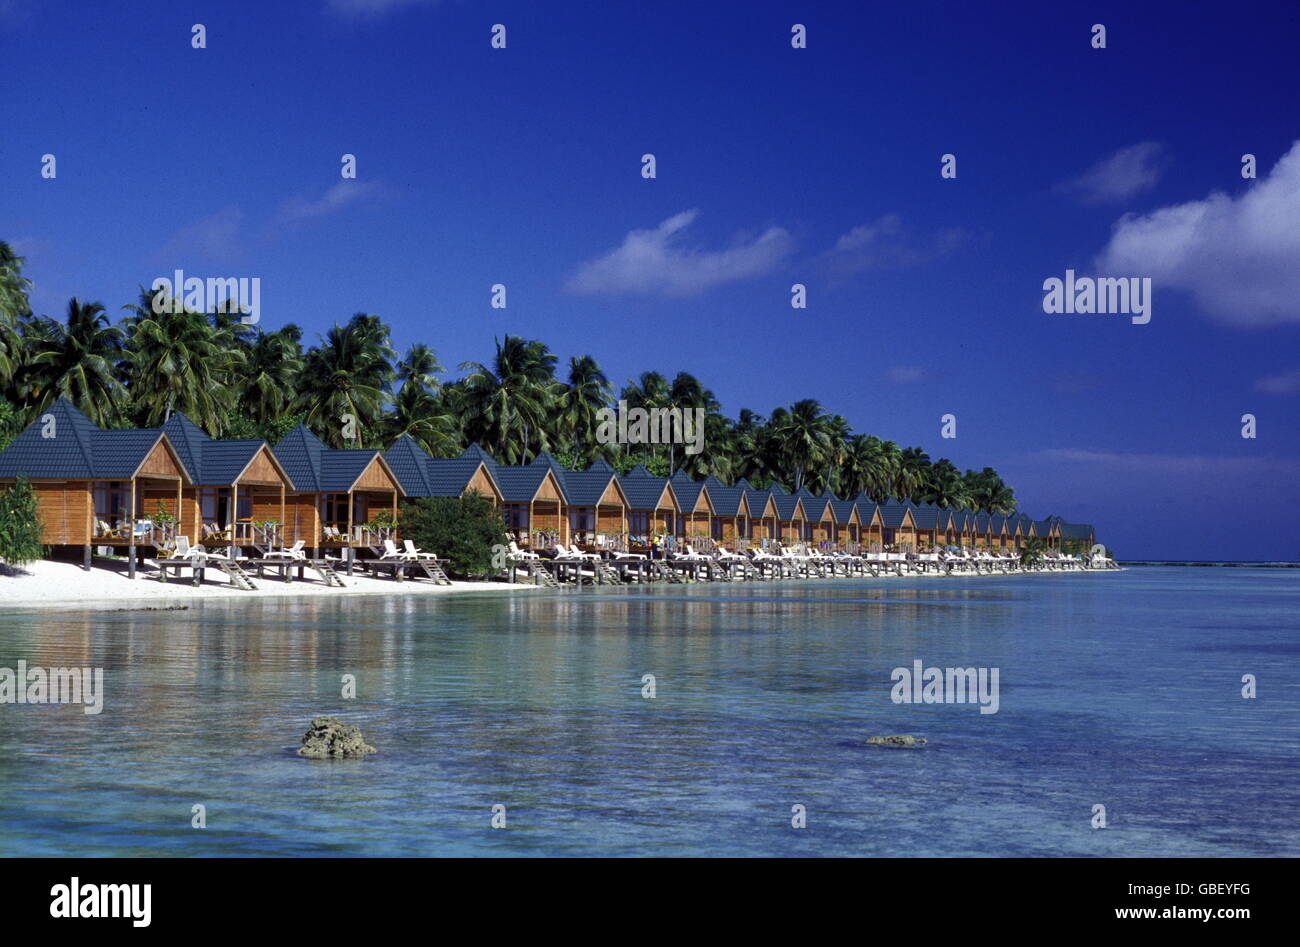 bungalow at the seascape of the island and atoll of the Maldives Islands in the indian ocean. Stock Photo